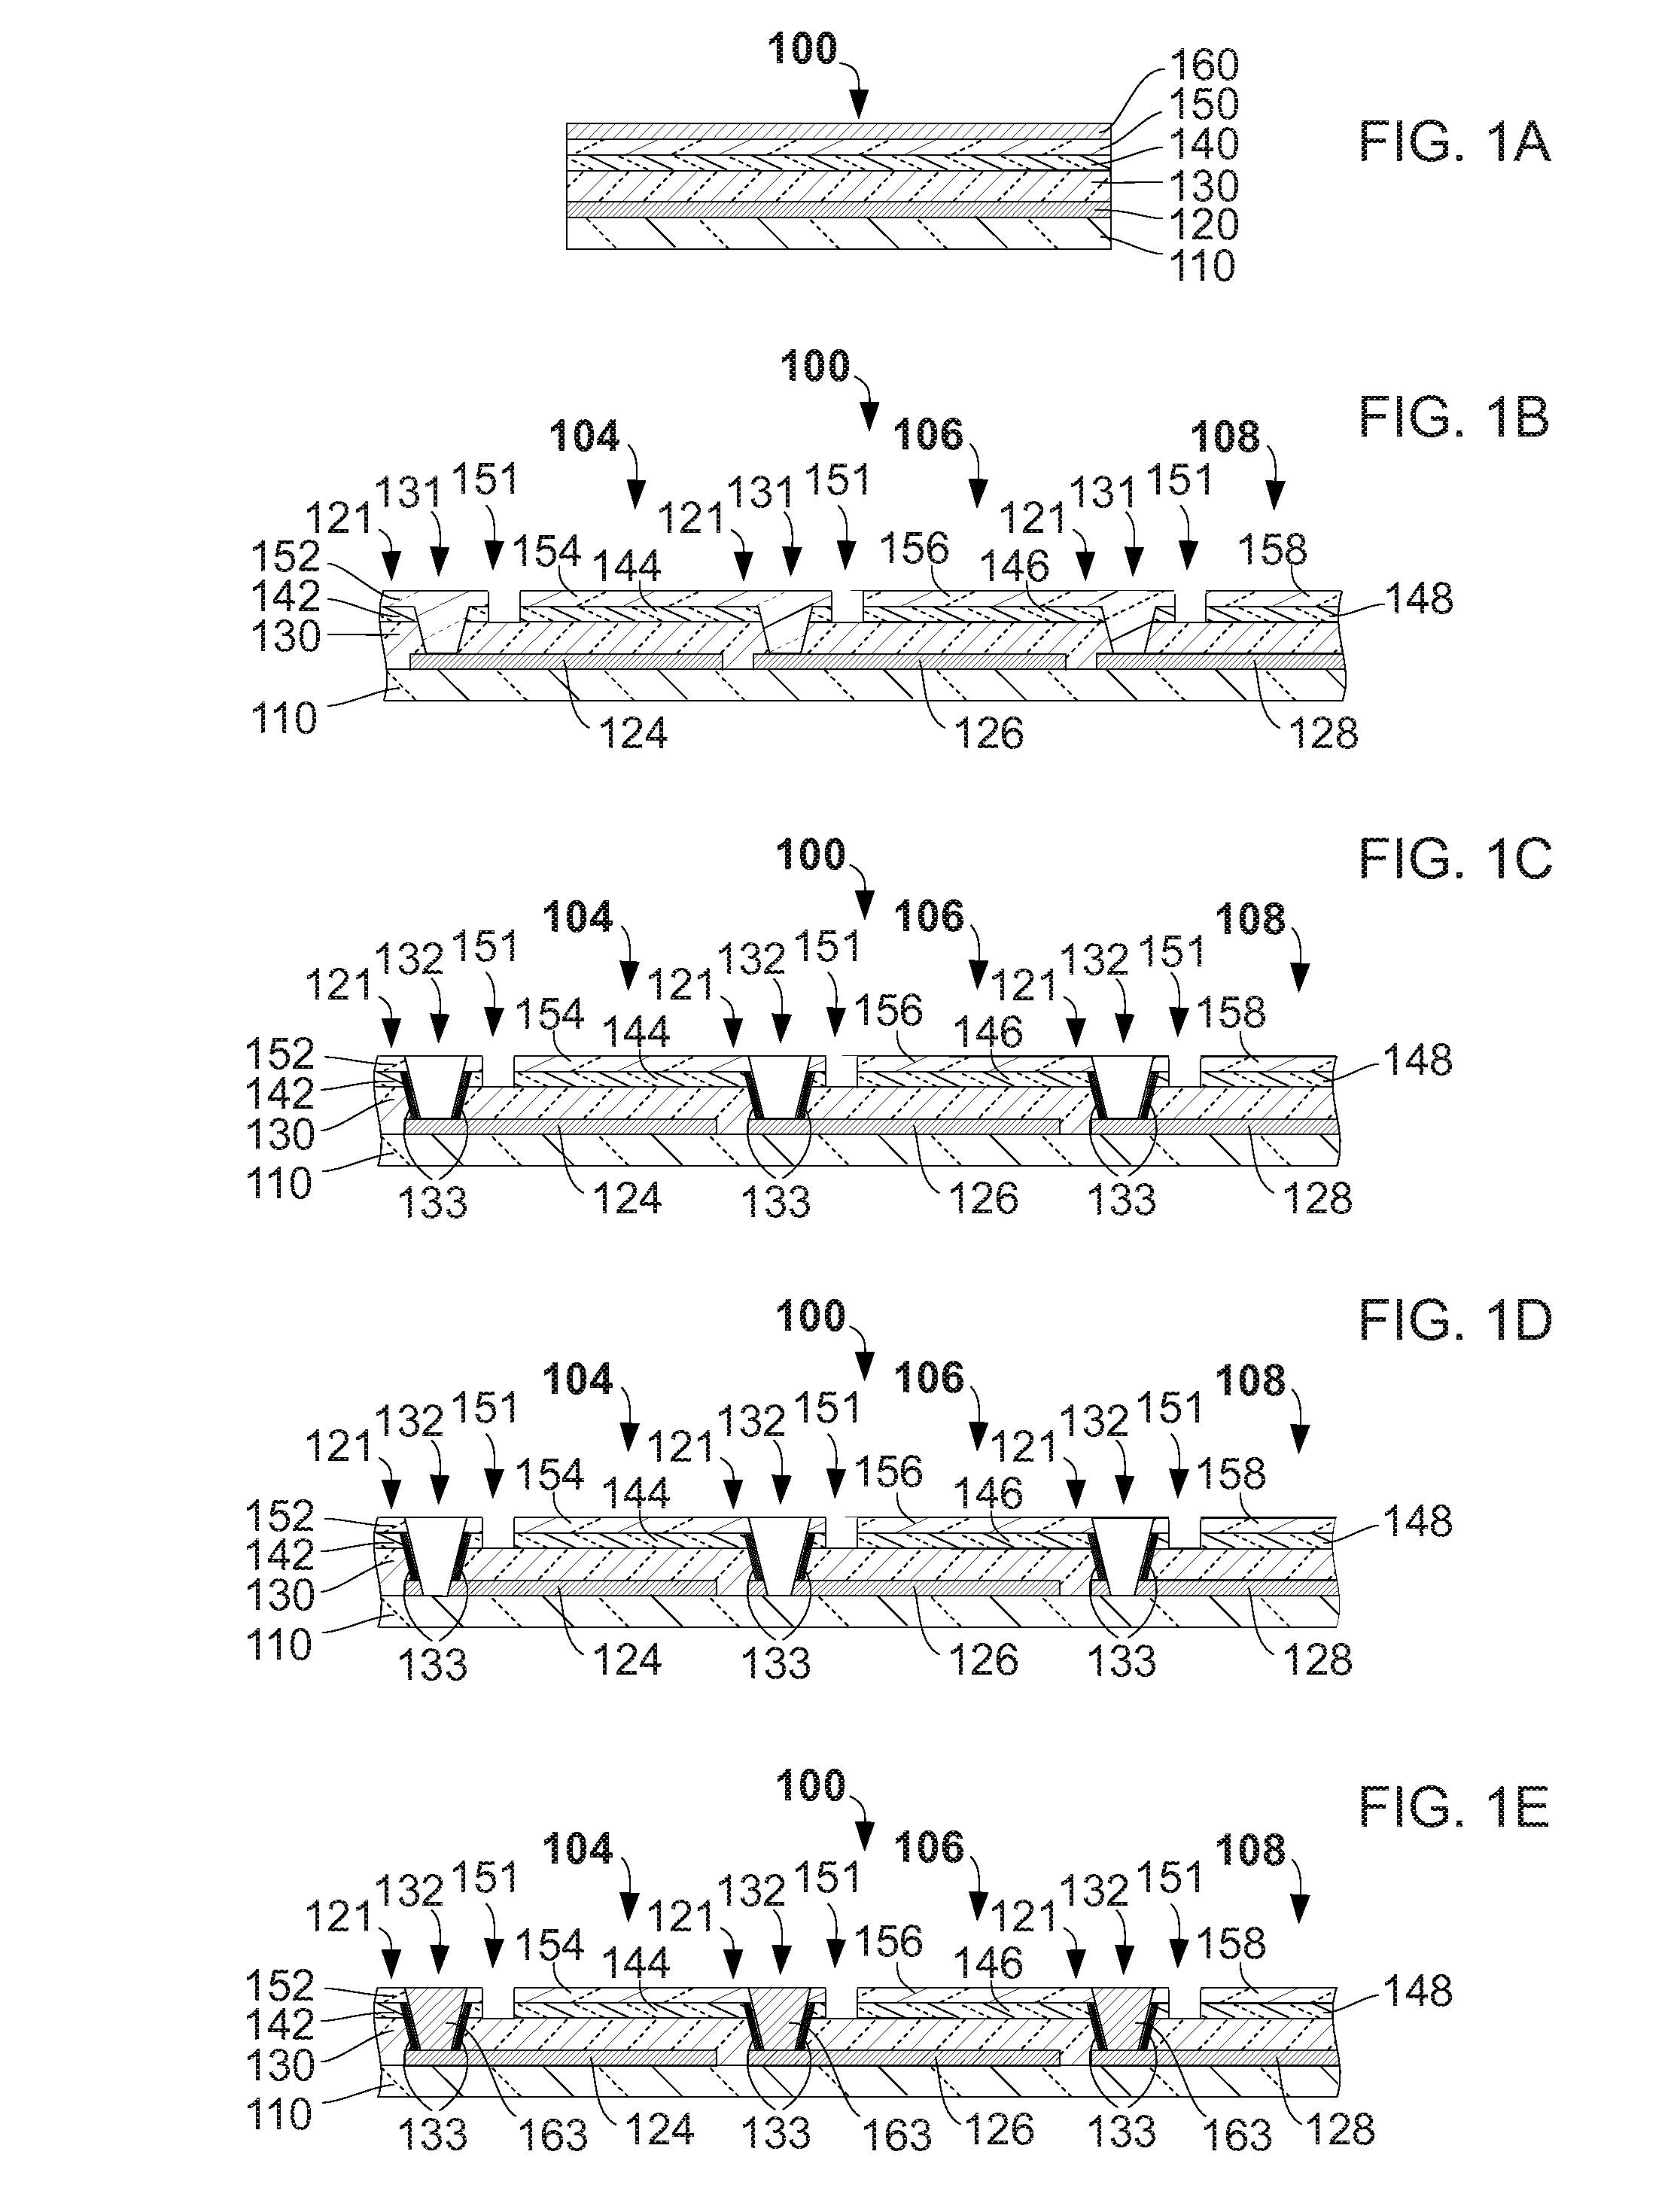 Thin-film photovoltaic device with wavy monolithic interconnects